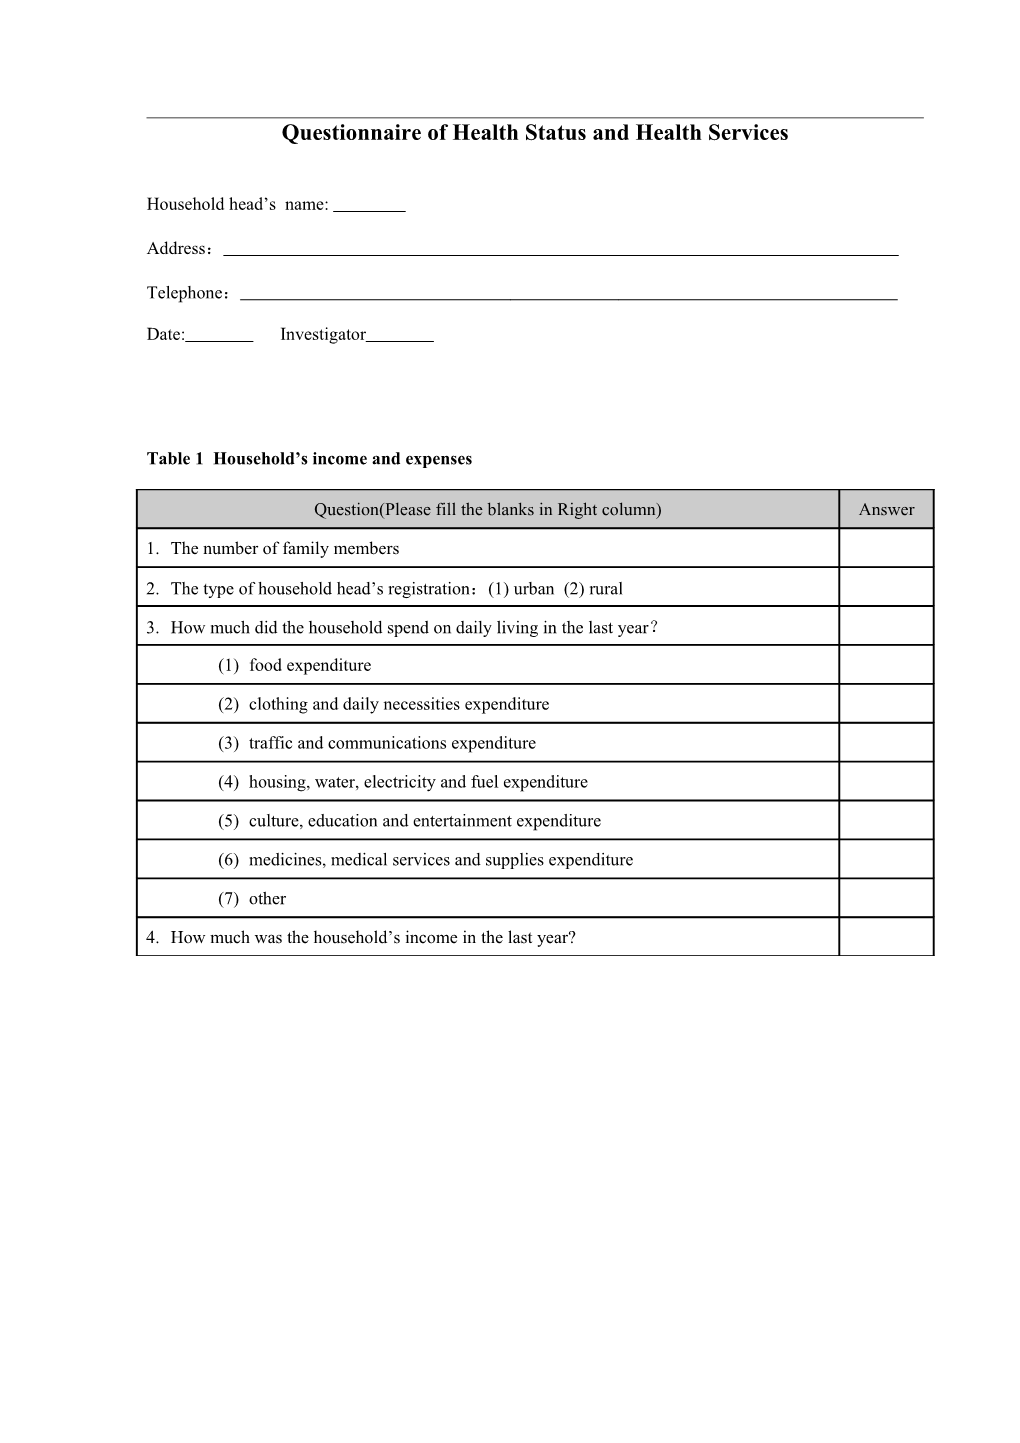 Questionnaire of Health Status and Health Services